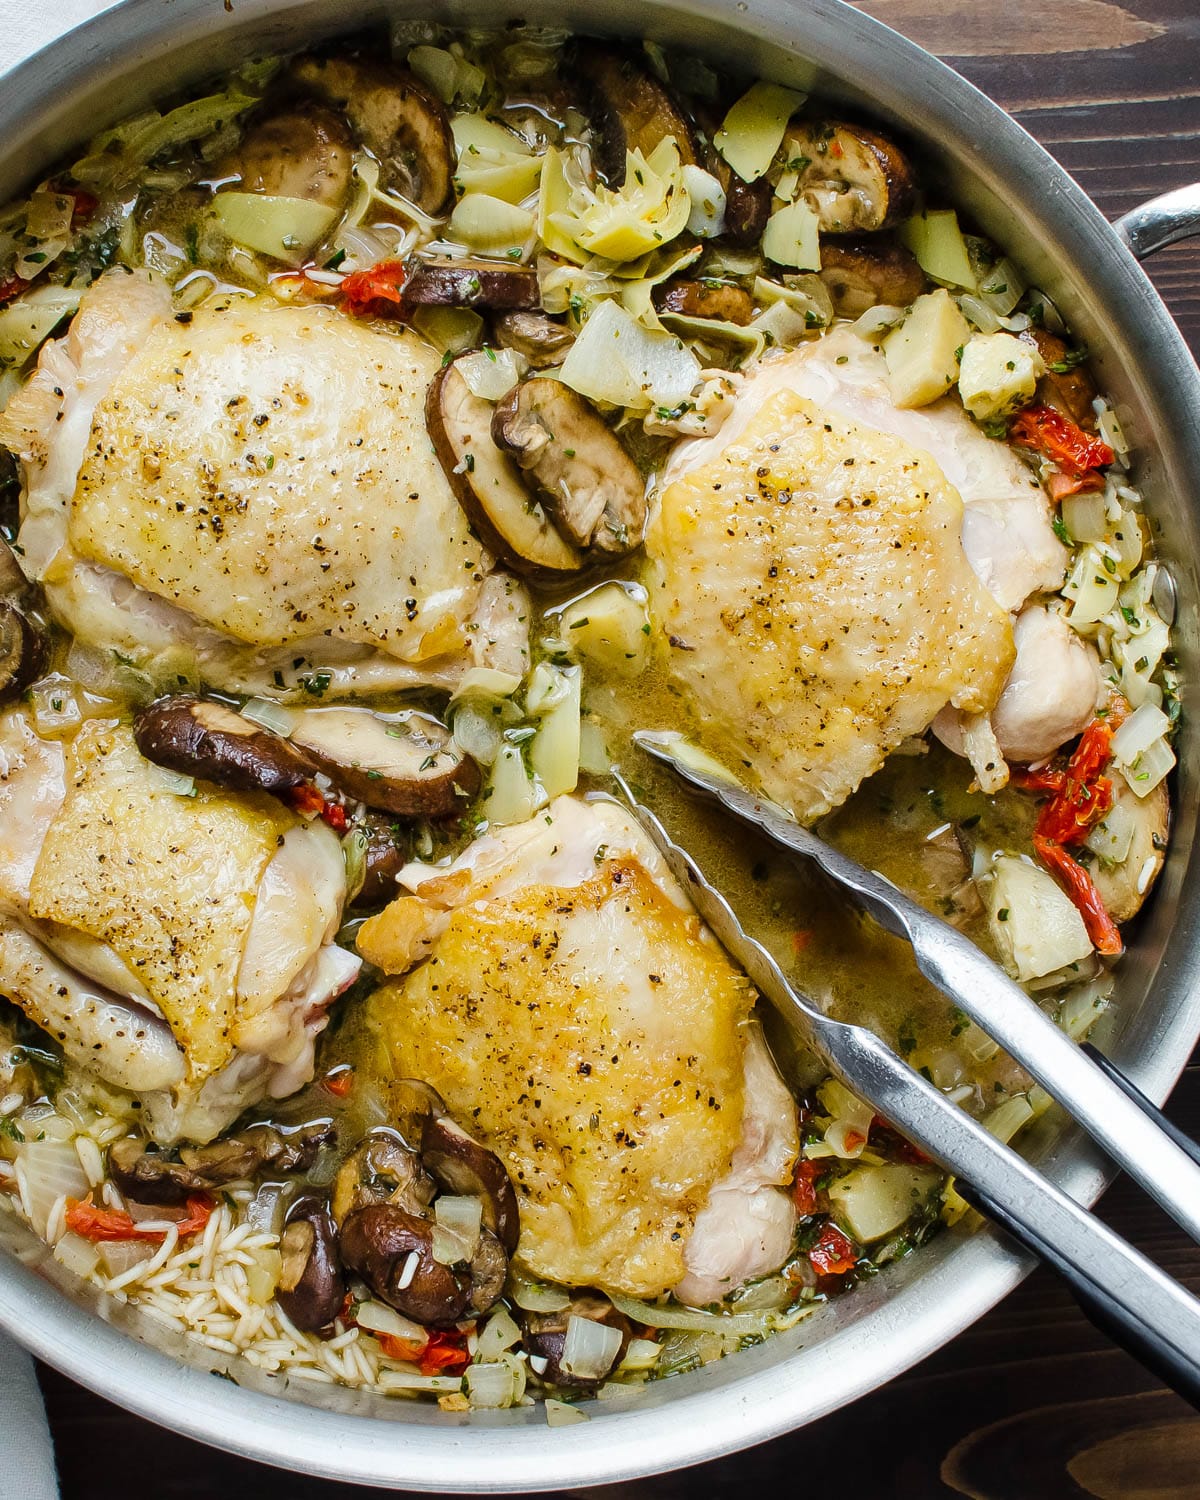 Nestling the par-cooked chicken thighs into the rice and vegetable mixture.